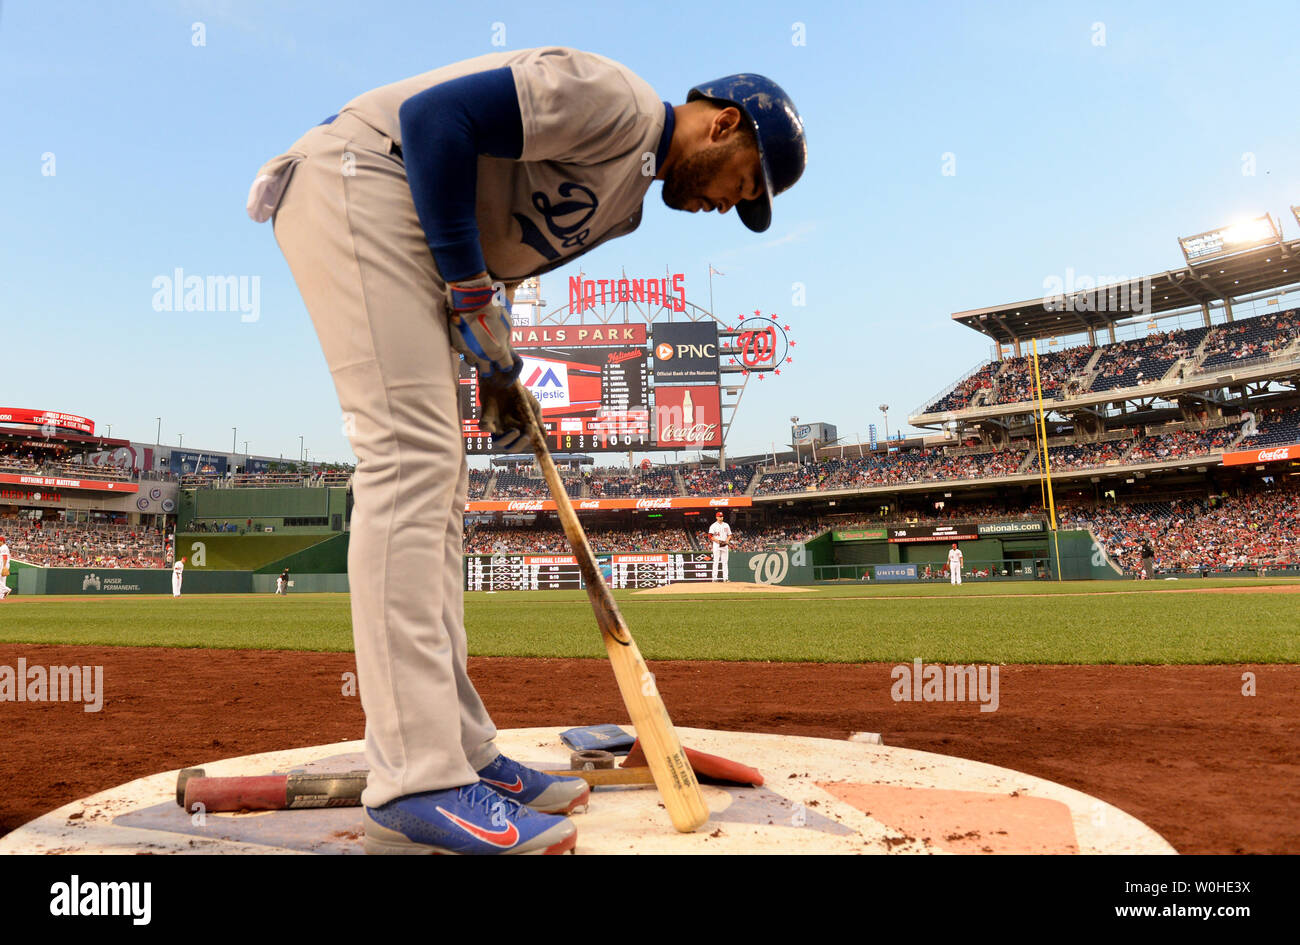 Los Angeles Dodgers Matt Kemp gets ready in the batting circle in the fourth inning of game against the Washington Nationals at Nationals Stadium in Washington, DC on May 6, 2014.   UPI/Pat Benic Stock Photo